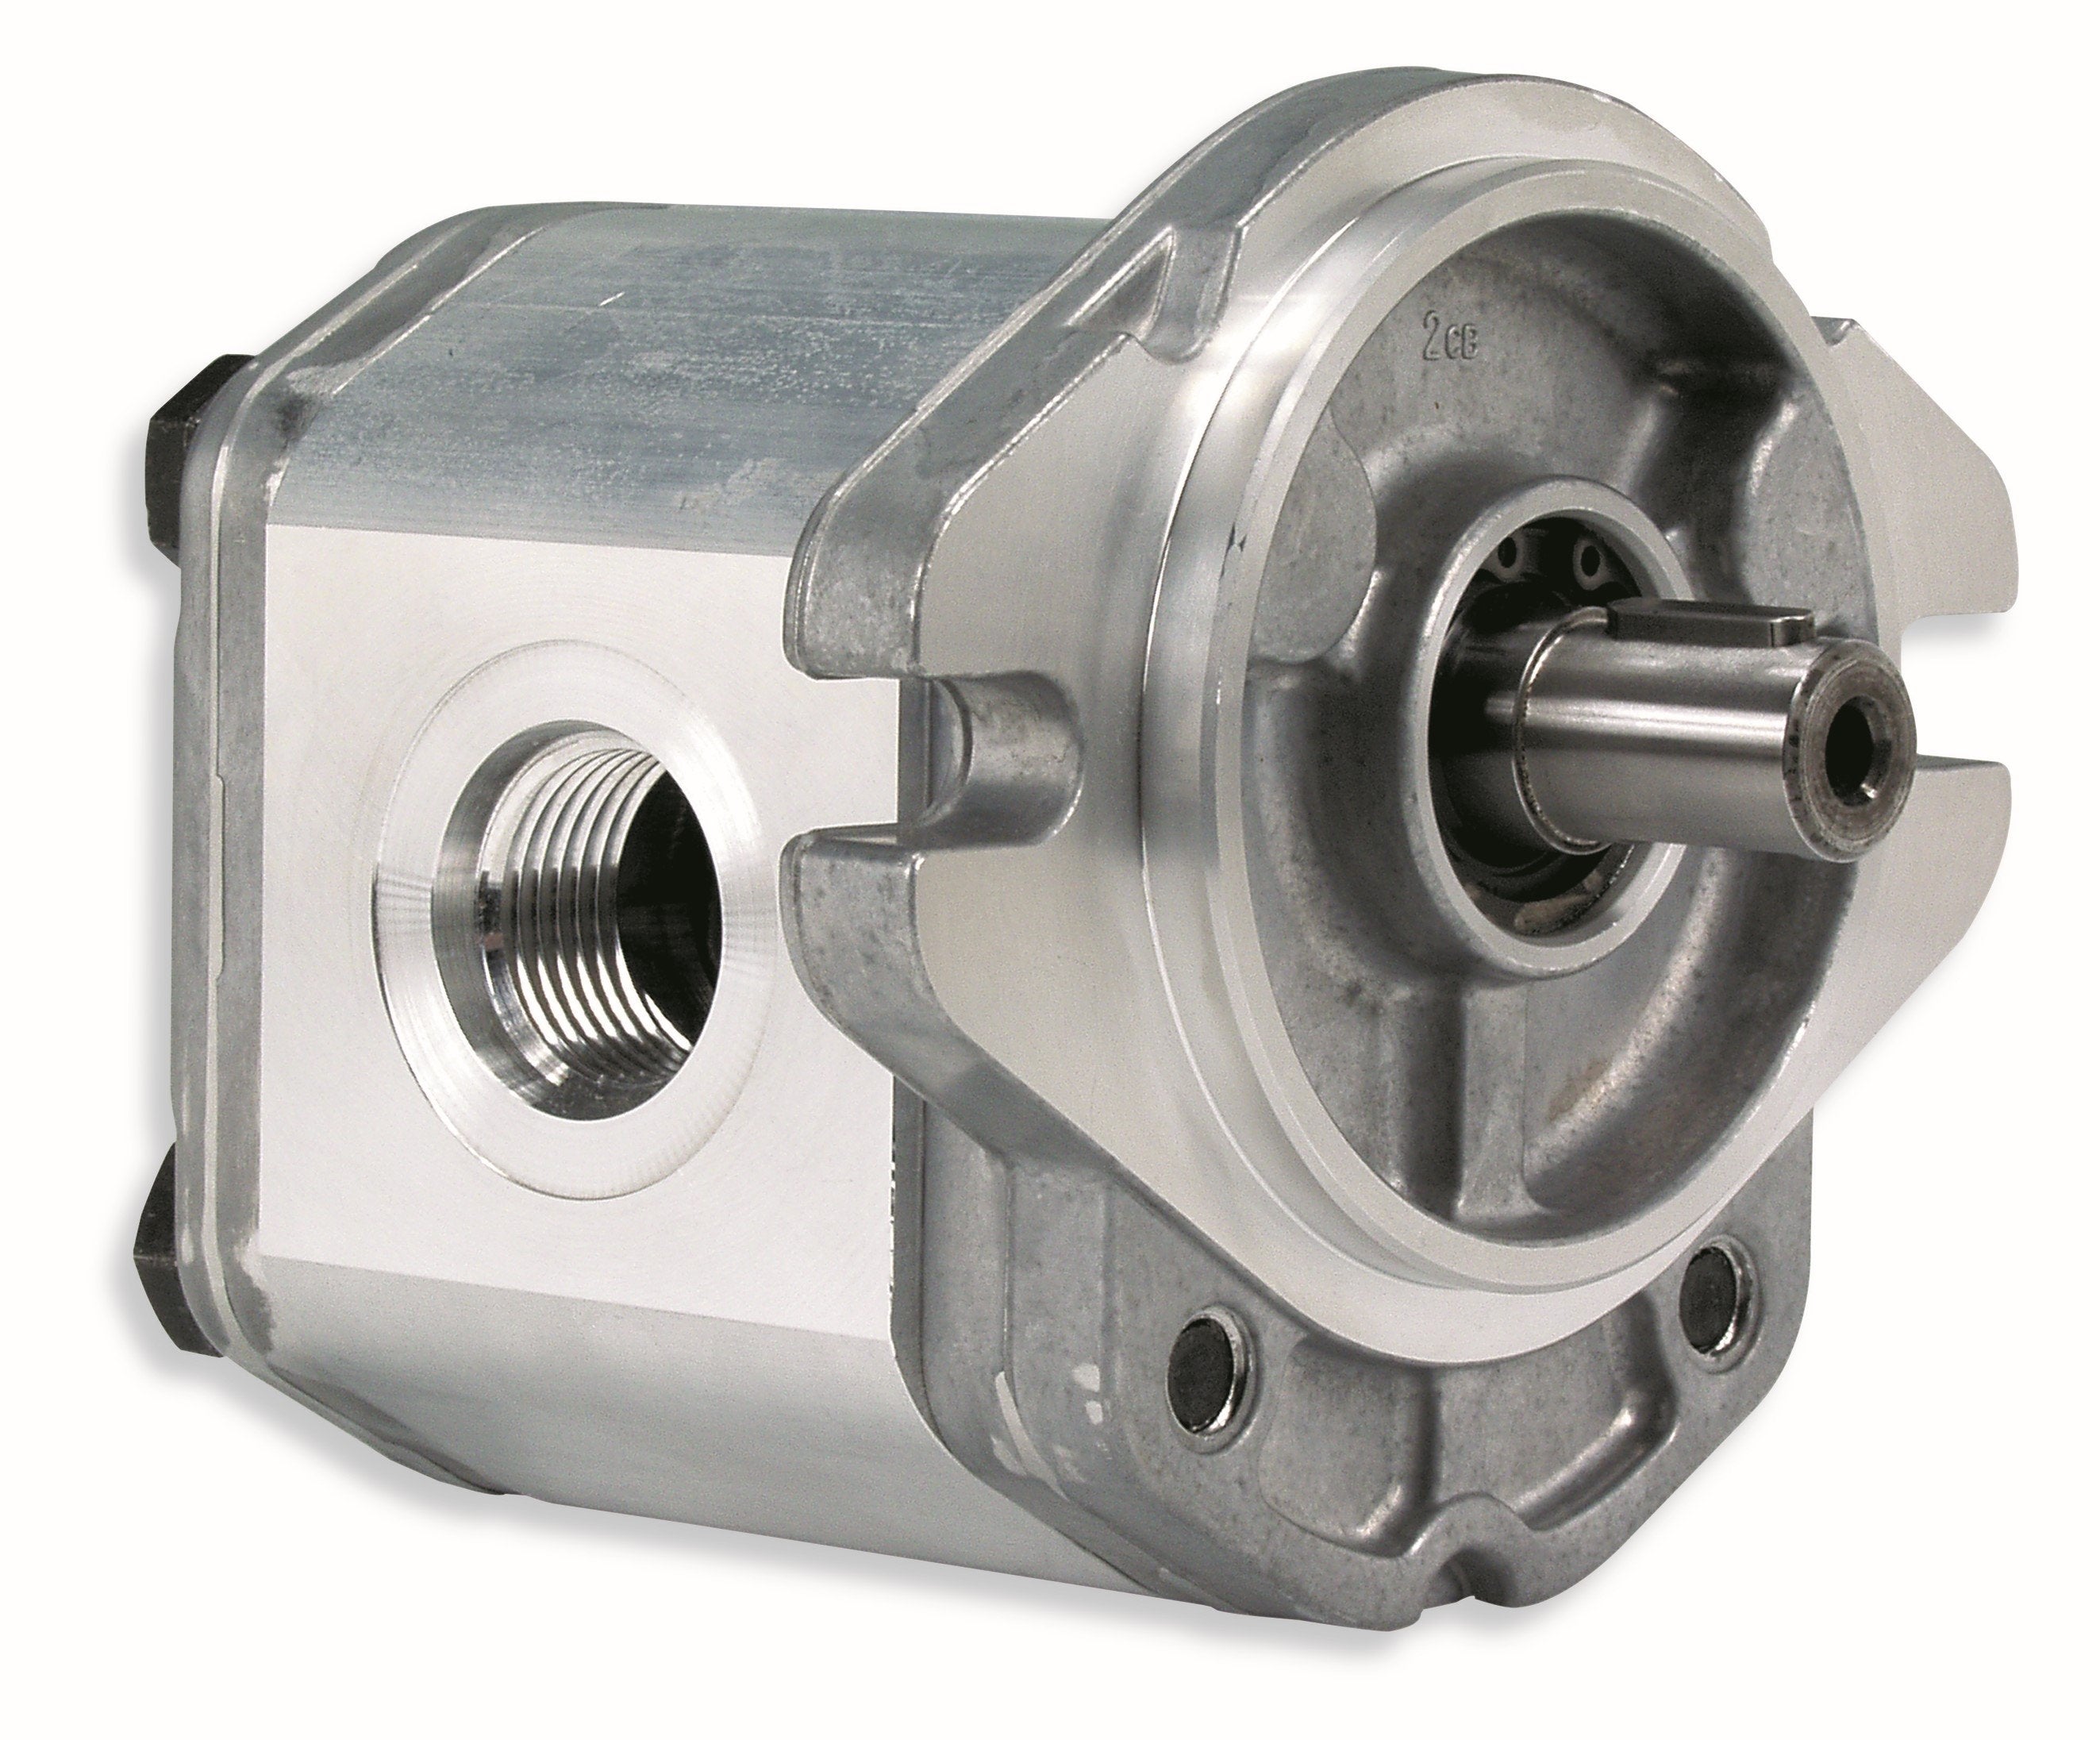 GHM3A-R-110-S1-FA-E4 : Marzocchi Gear Motor, Bidirectional, 71cc, 2900psi rated, 2500RPM, 1.5" #24 SAE ports, 13T 16/32DP Splined Shaft